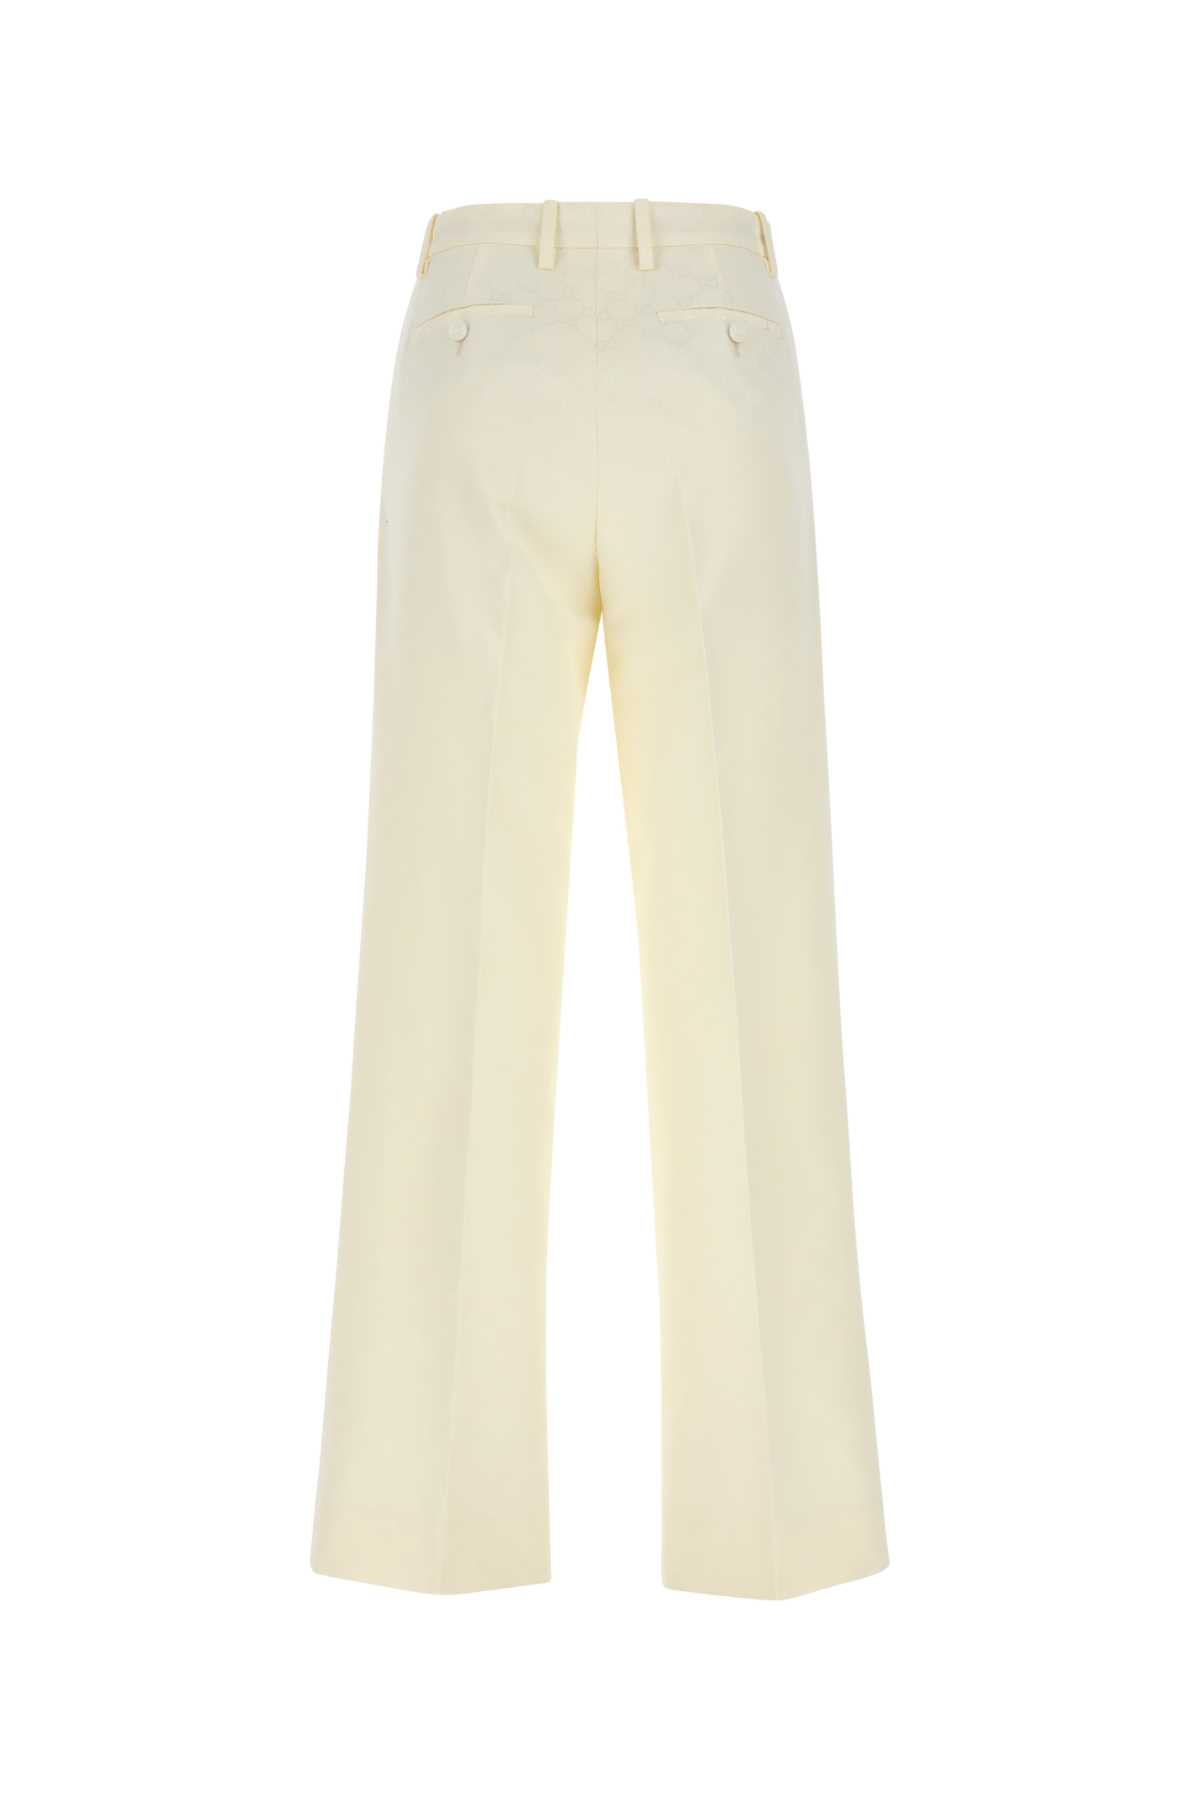 Gucci Embroidered Cotton Blend Wide-leg Trouser In Beige